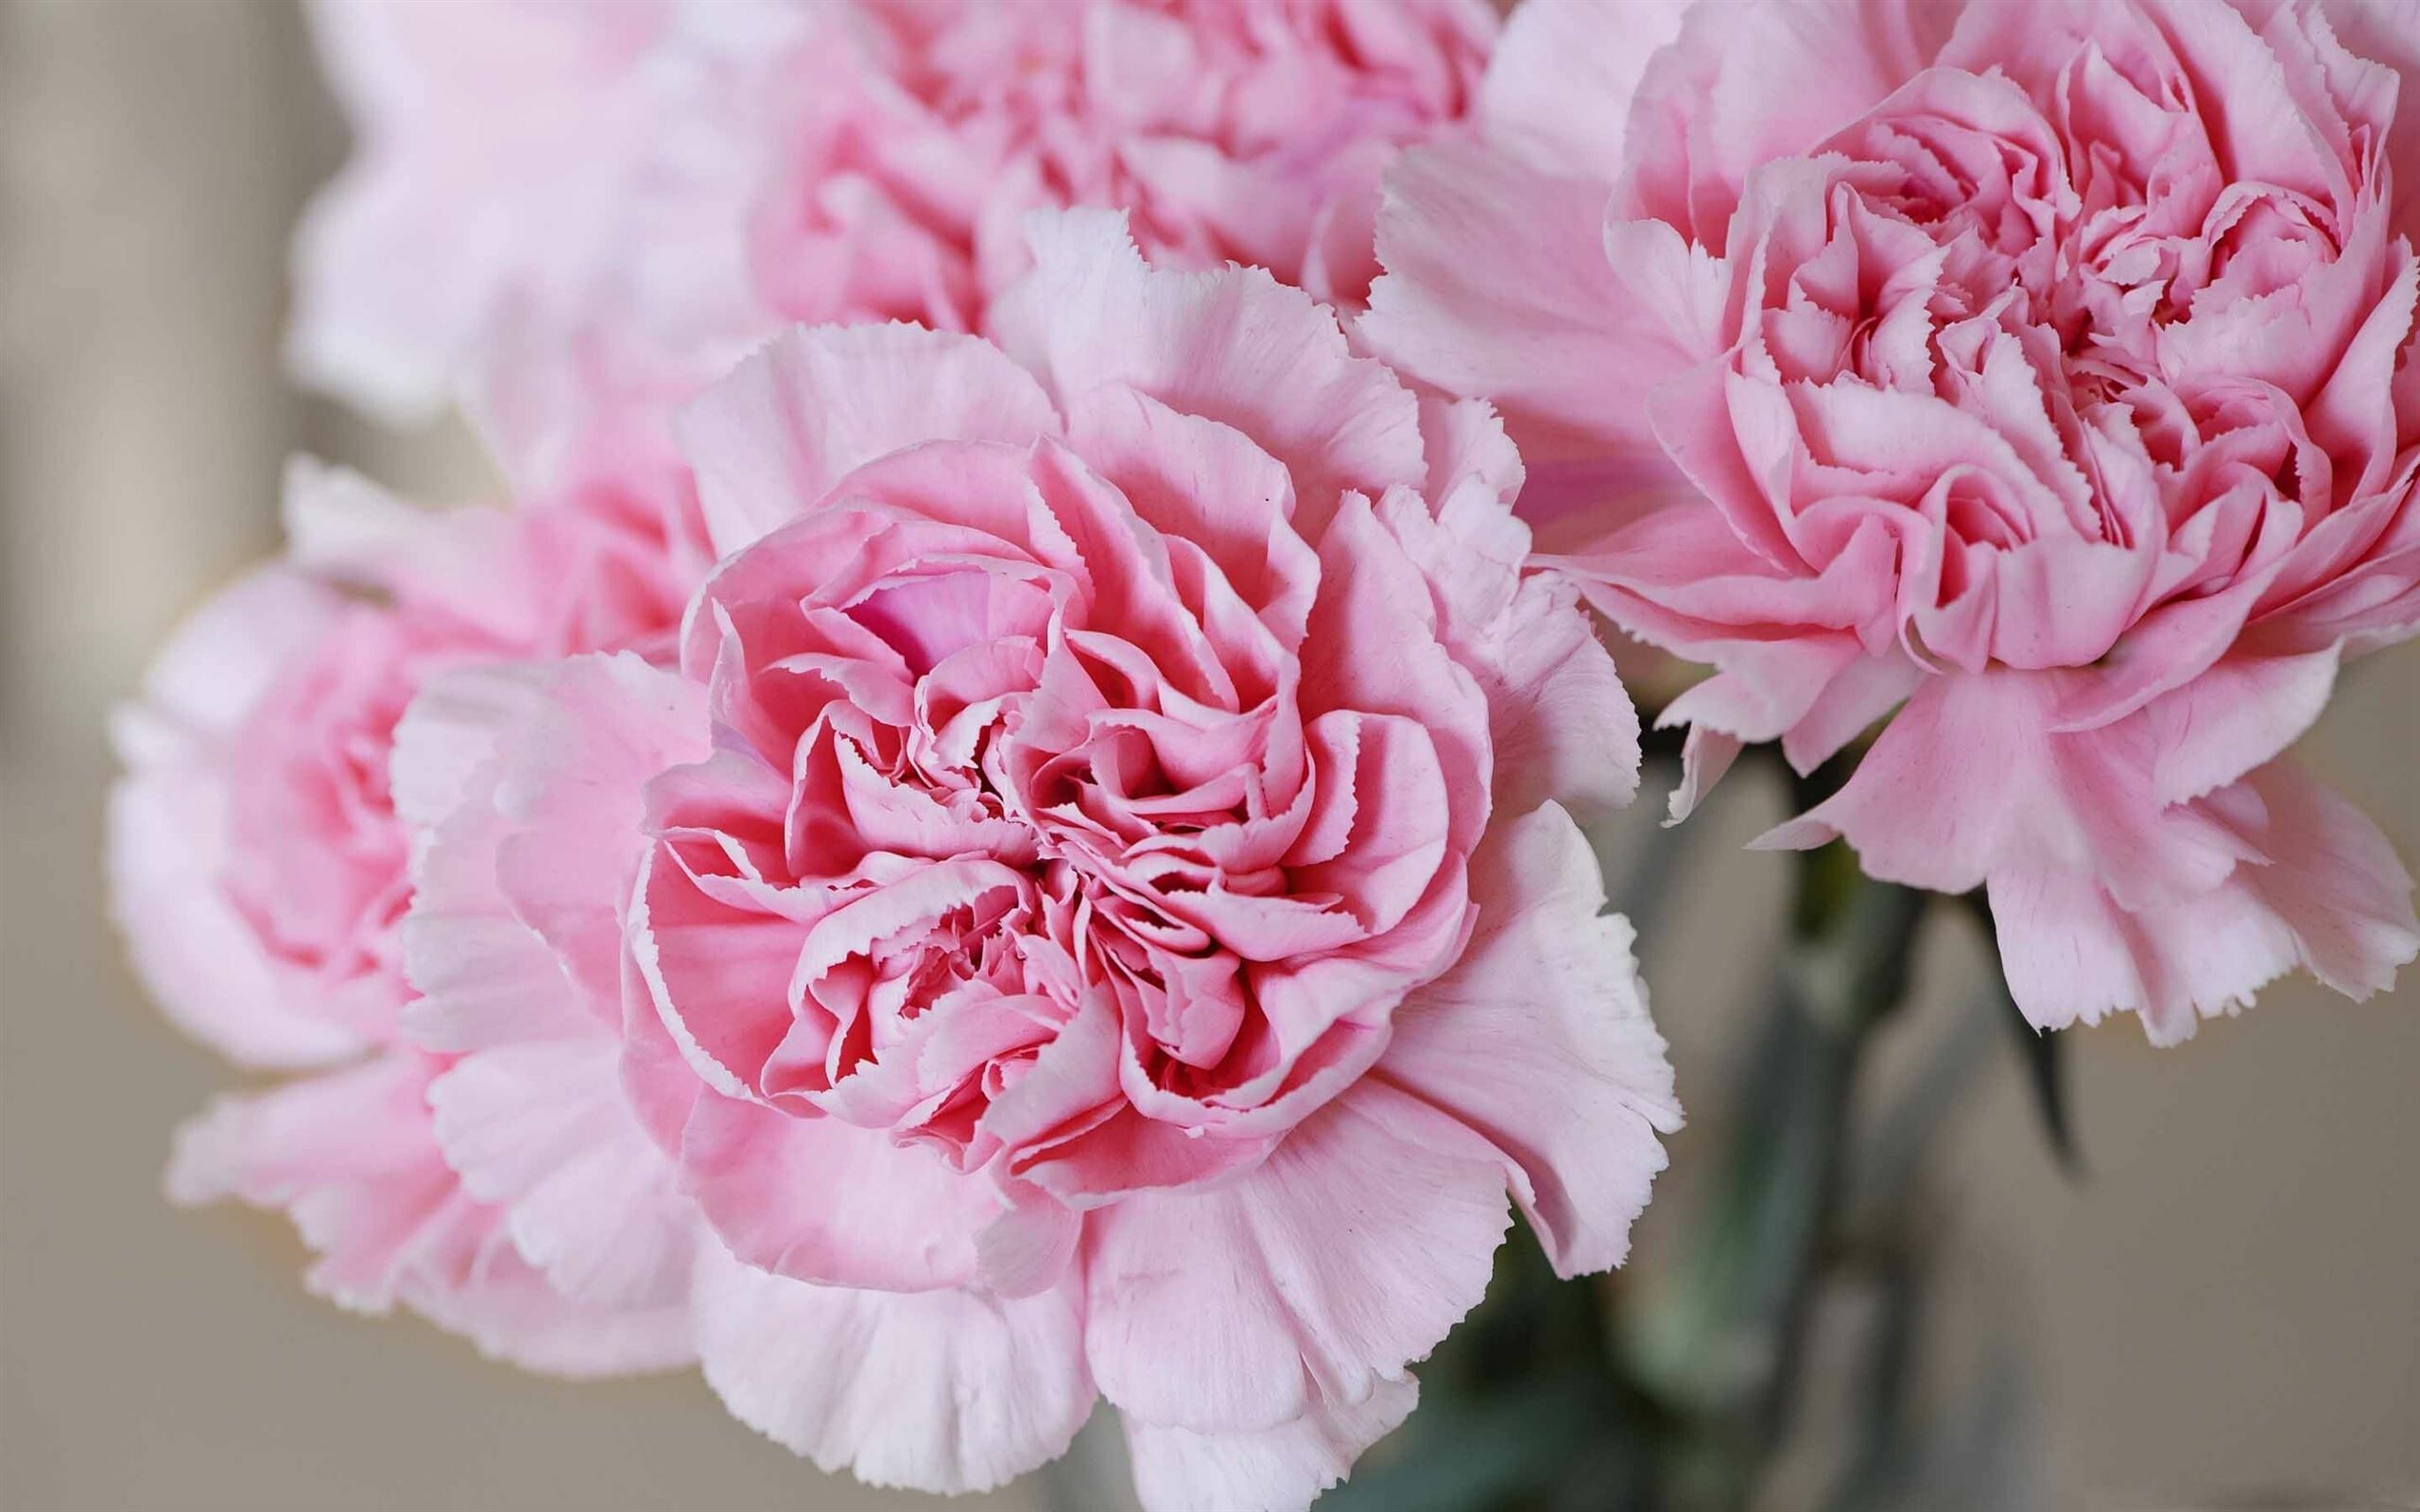 Carnation: For the most part, carnations express love, fascination, and distinction, though there are many variations dependent on color. 2560x1600 HD Wallpaper.